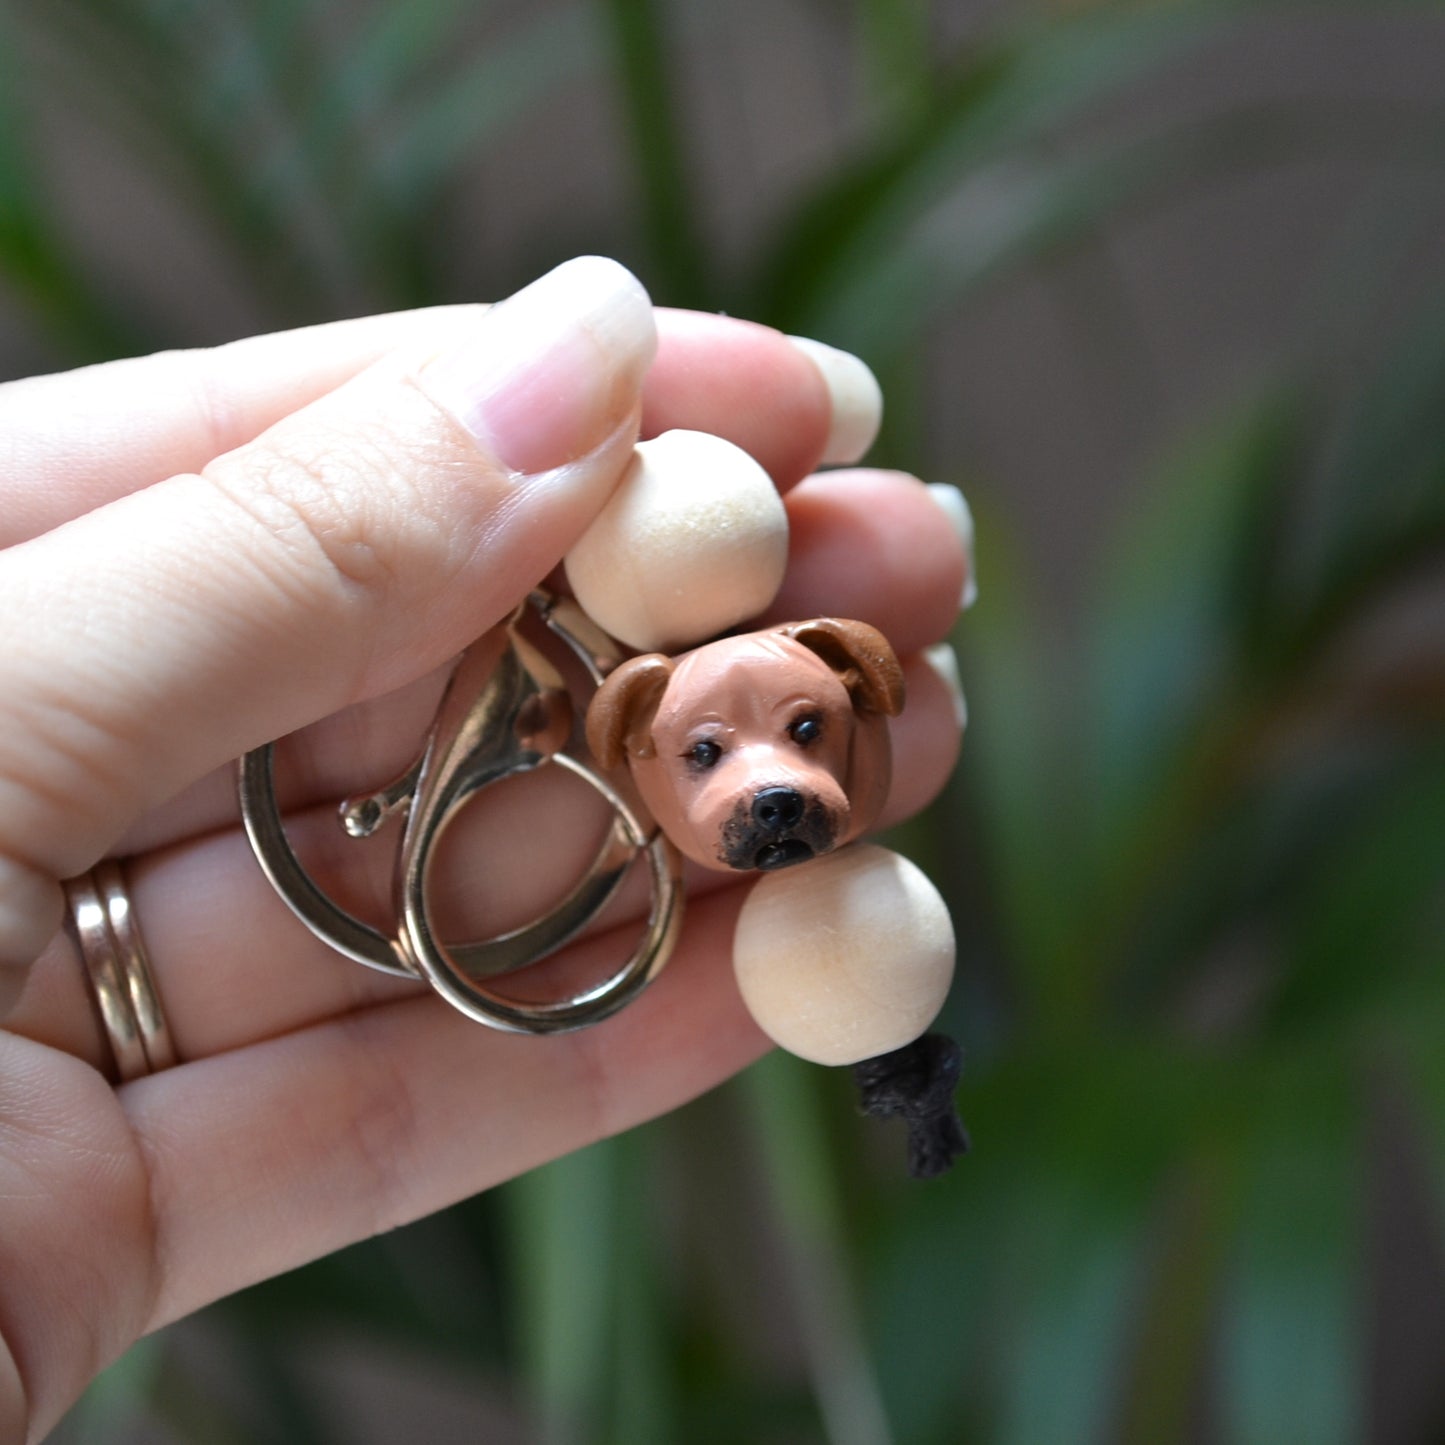 Handmade timber and polymer clay staffy dog keychain being held in front of green palm plant background